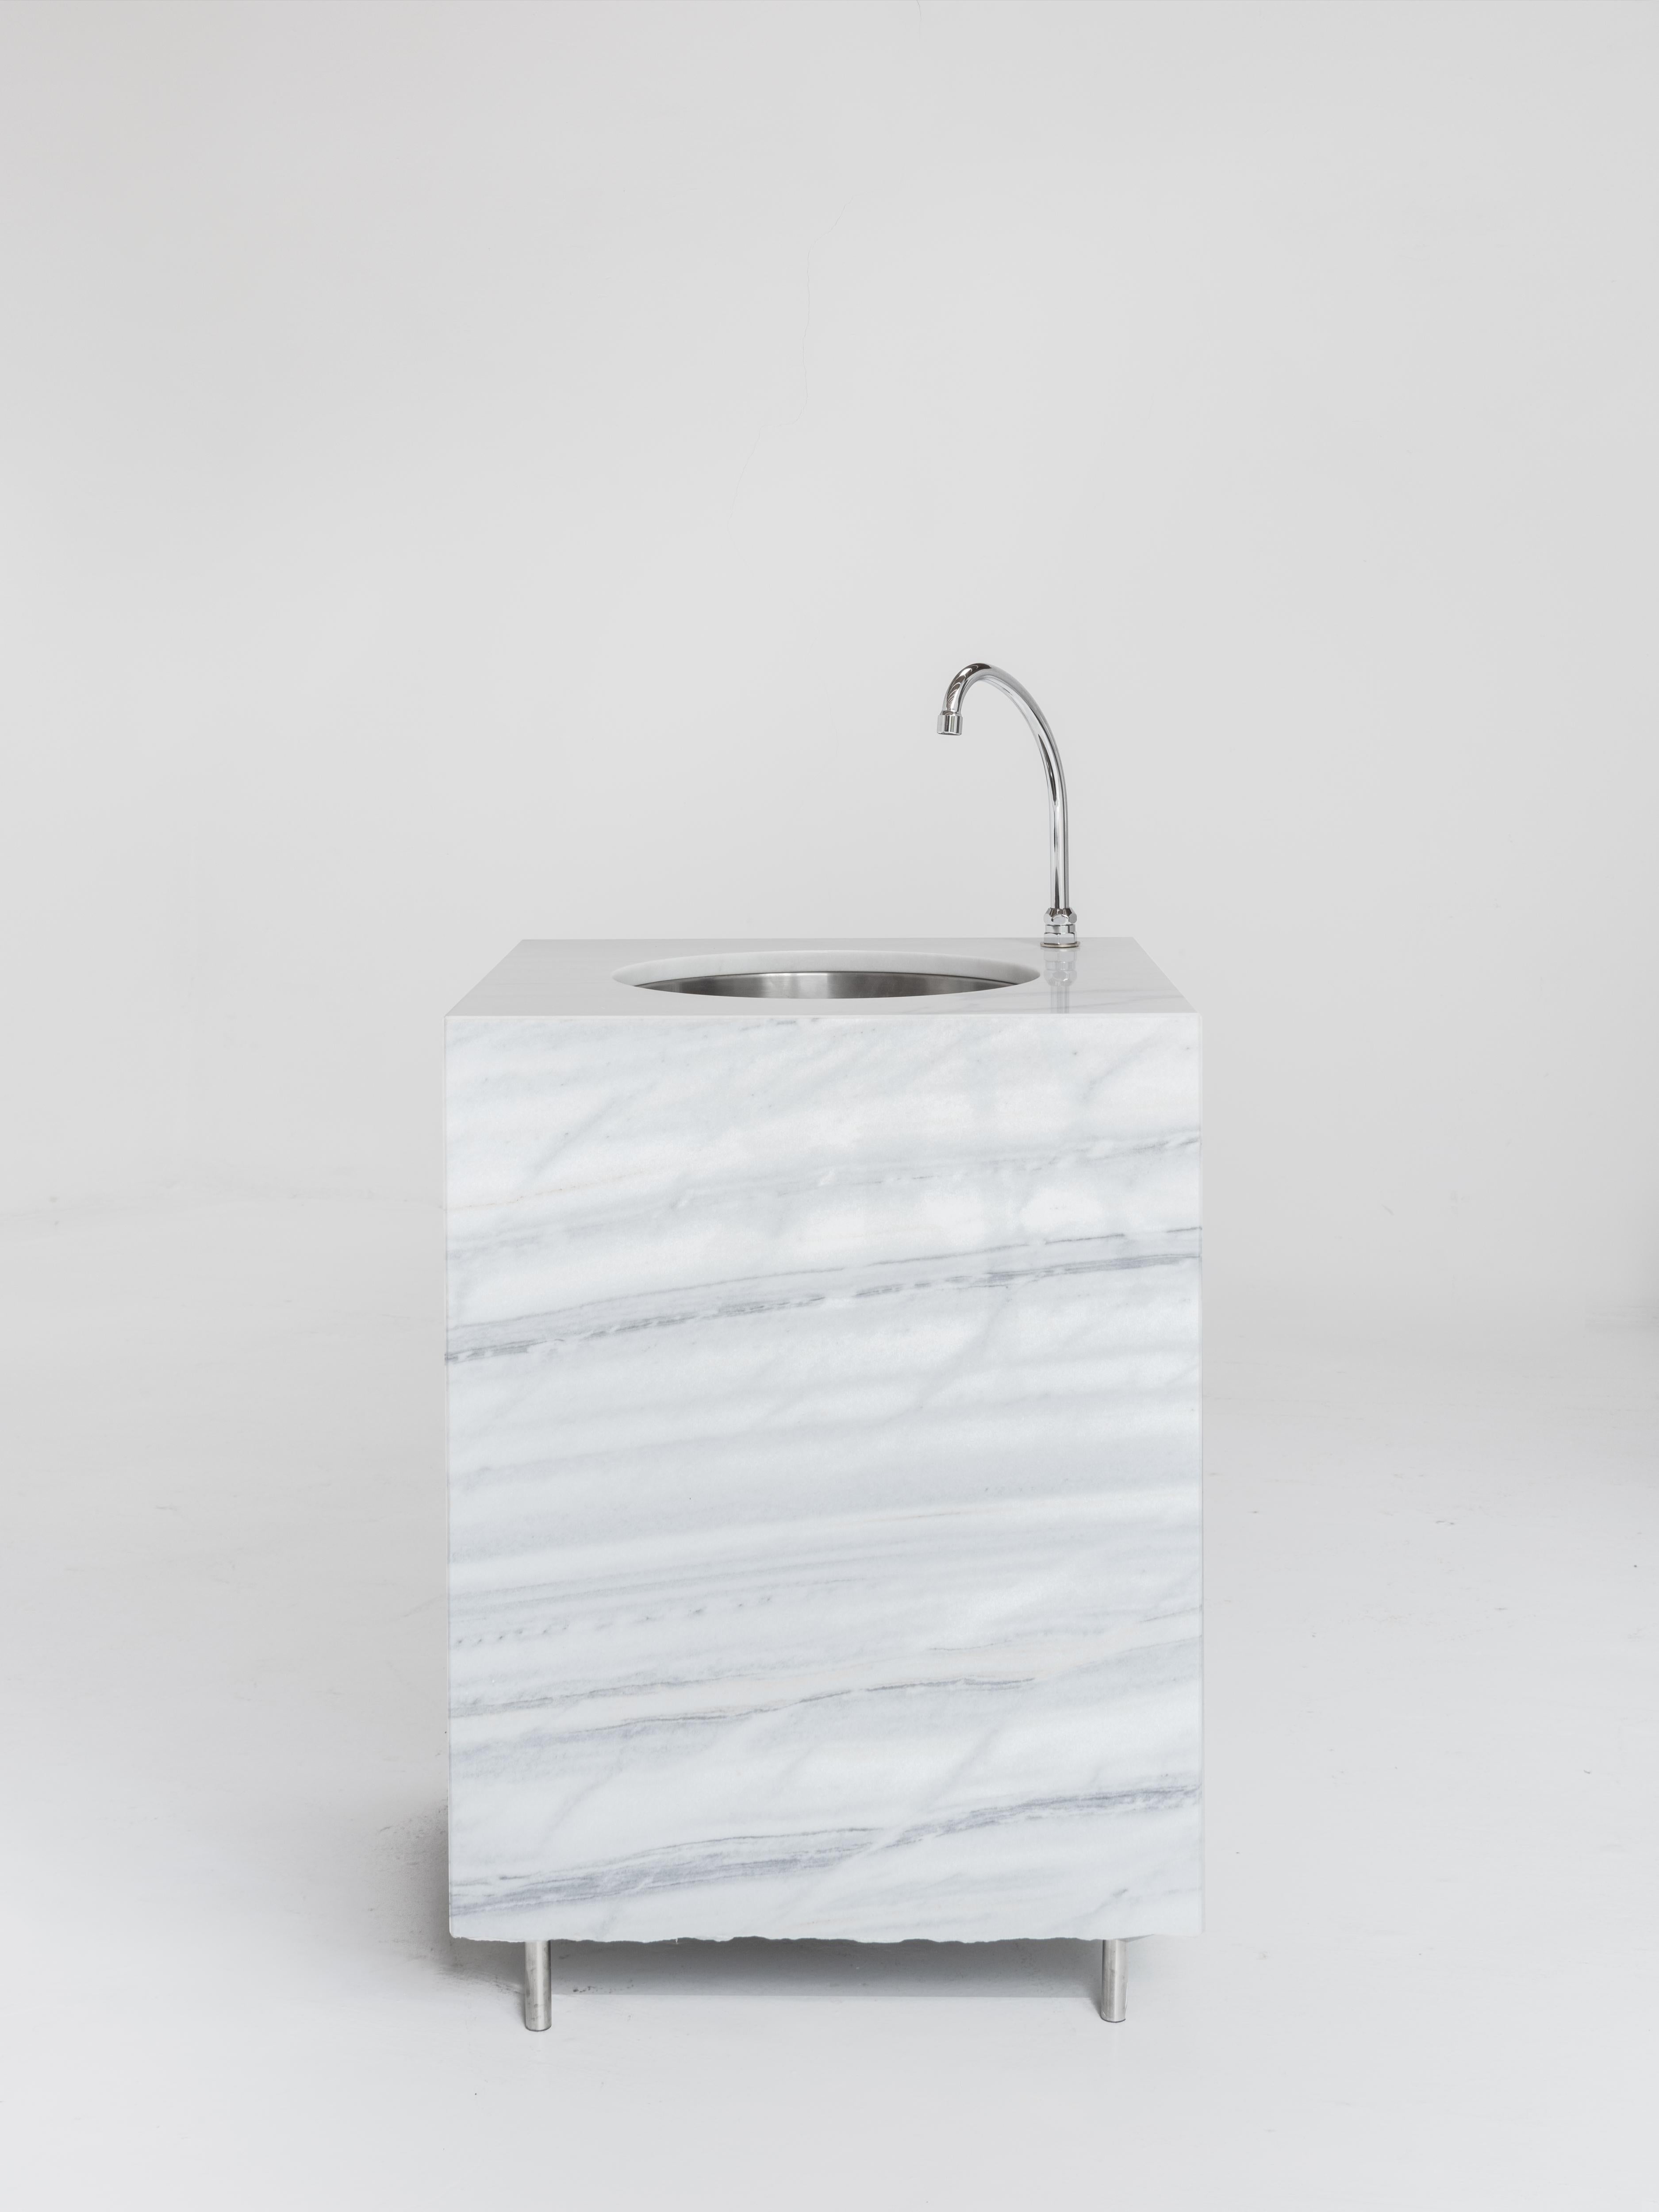 Sam Chermayeff
Sink
From the series “Concept Kitchen”
Produced in exclusive for SIDE GALLERY
Manufactured by Bagnara
Italy, 2020
Bianco Lasa marble
Contemporary Design

Measurements
60 cm x 60 cm x 86H cm
23,6 in x 23,6 in x 33,8H